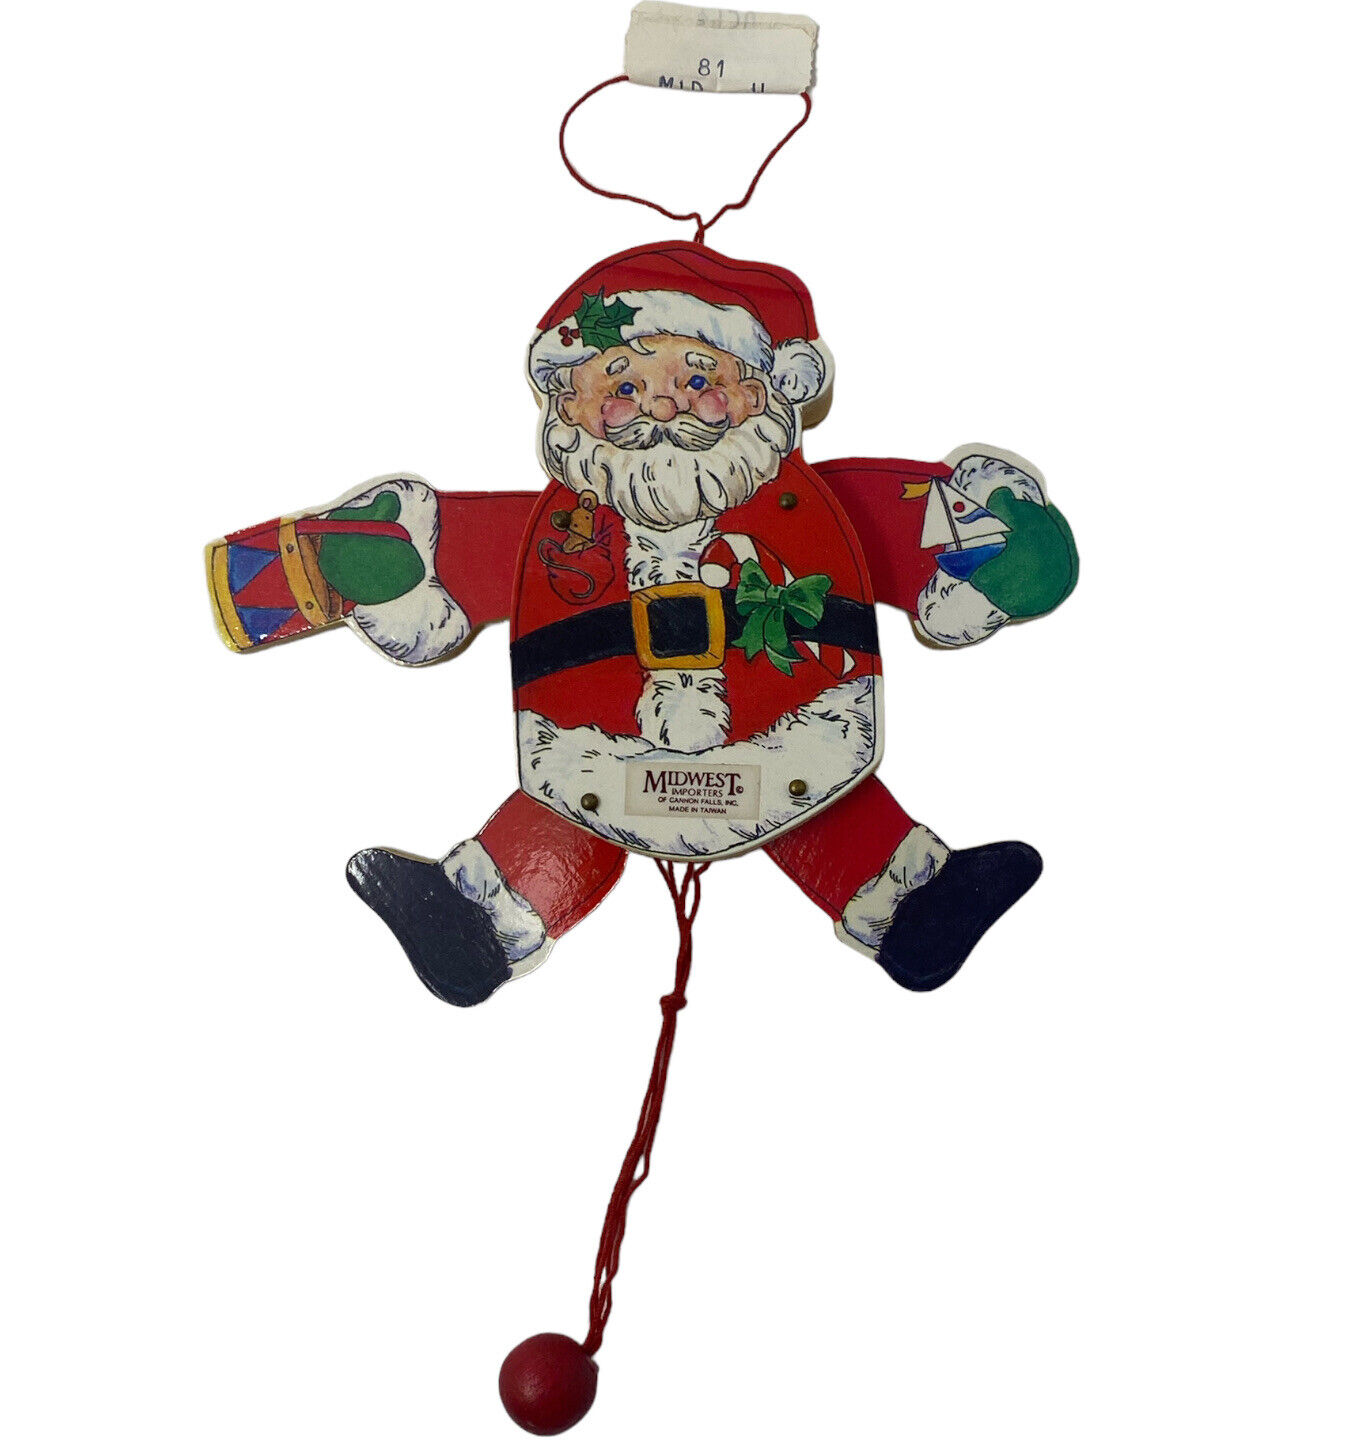 Vintage Midwest Imports SANTA CLAUS Pull String Jump Jack Toy Christmas Ornament